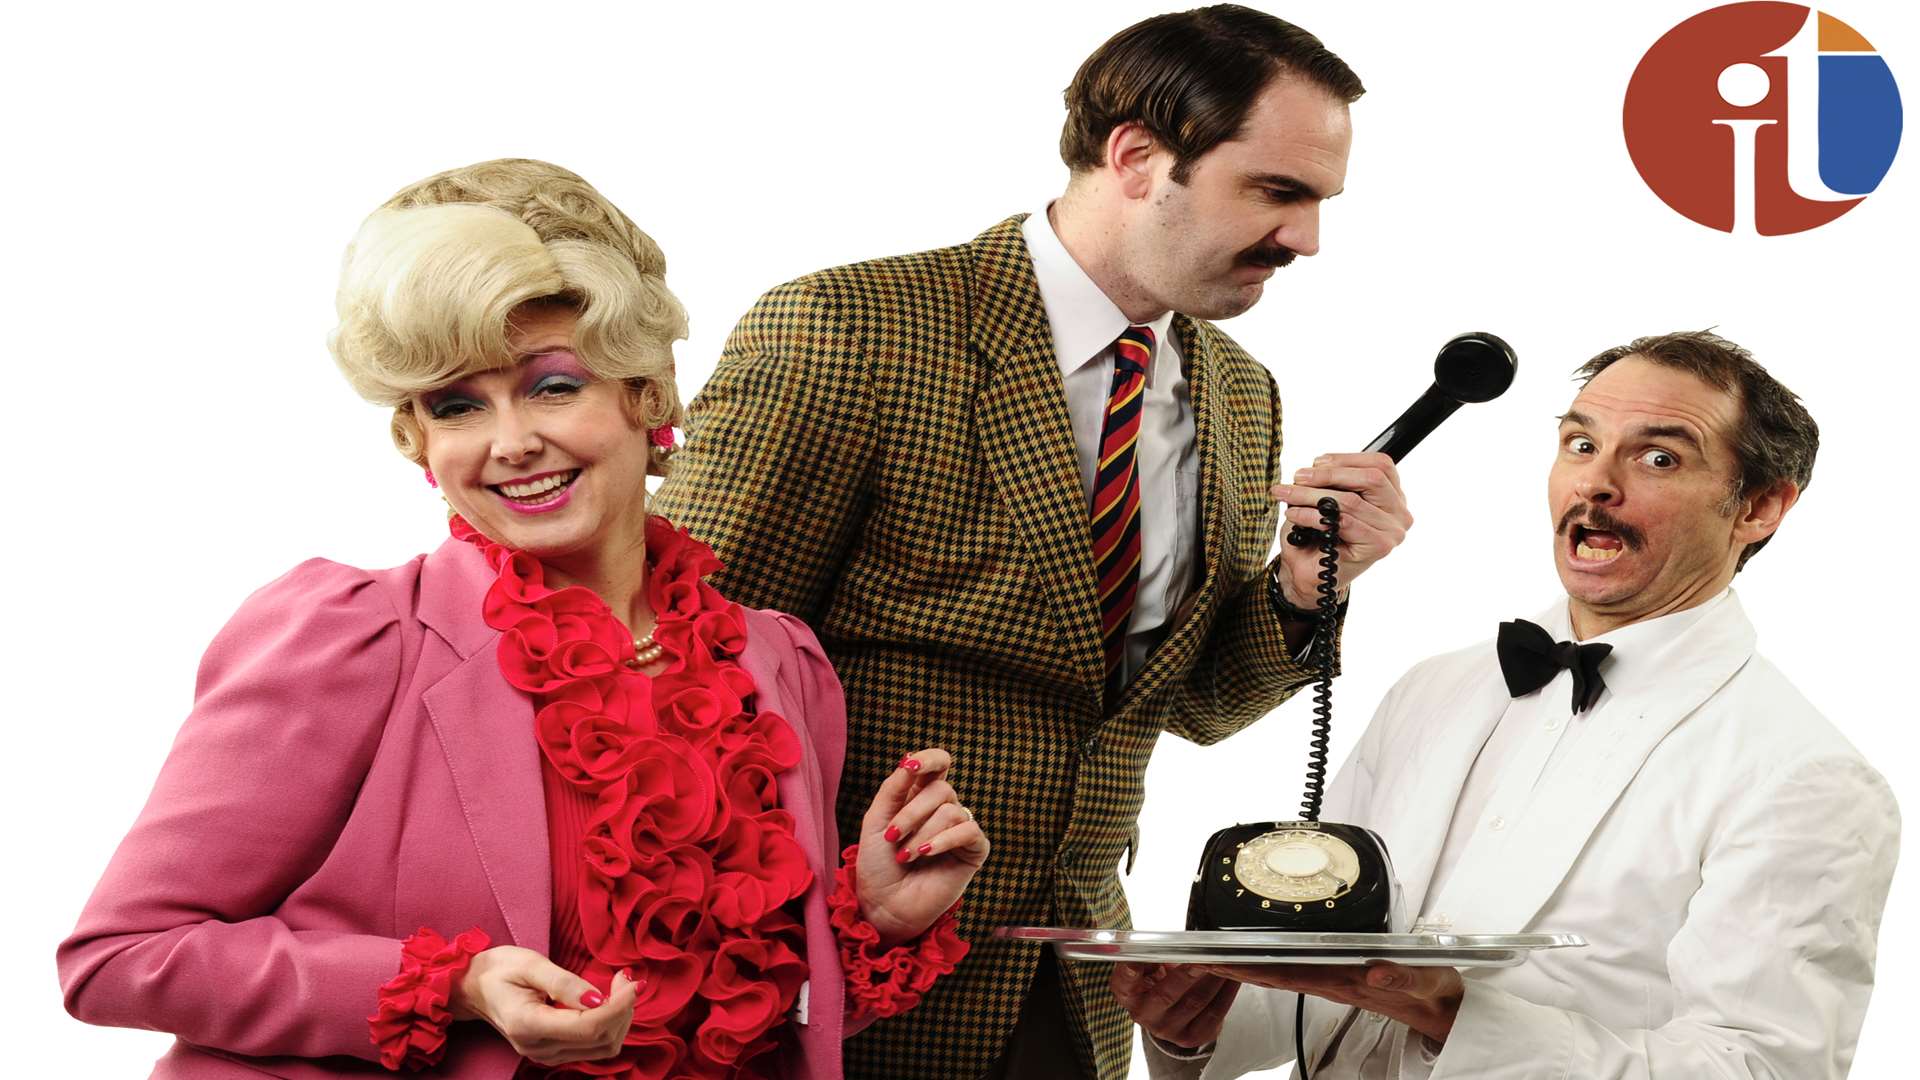 Faulty Towers the Dining Experience offers an election alternative